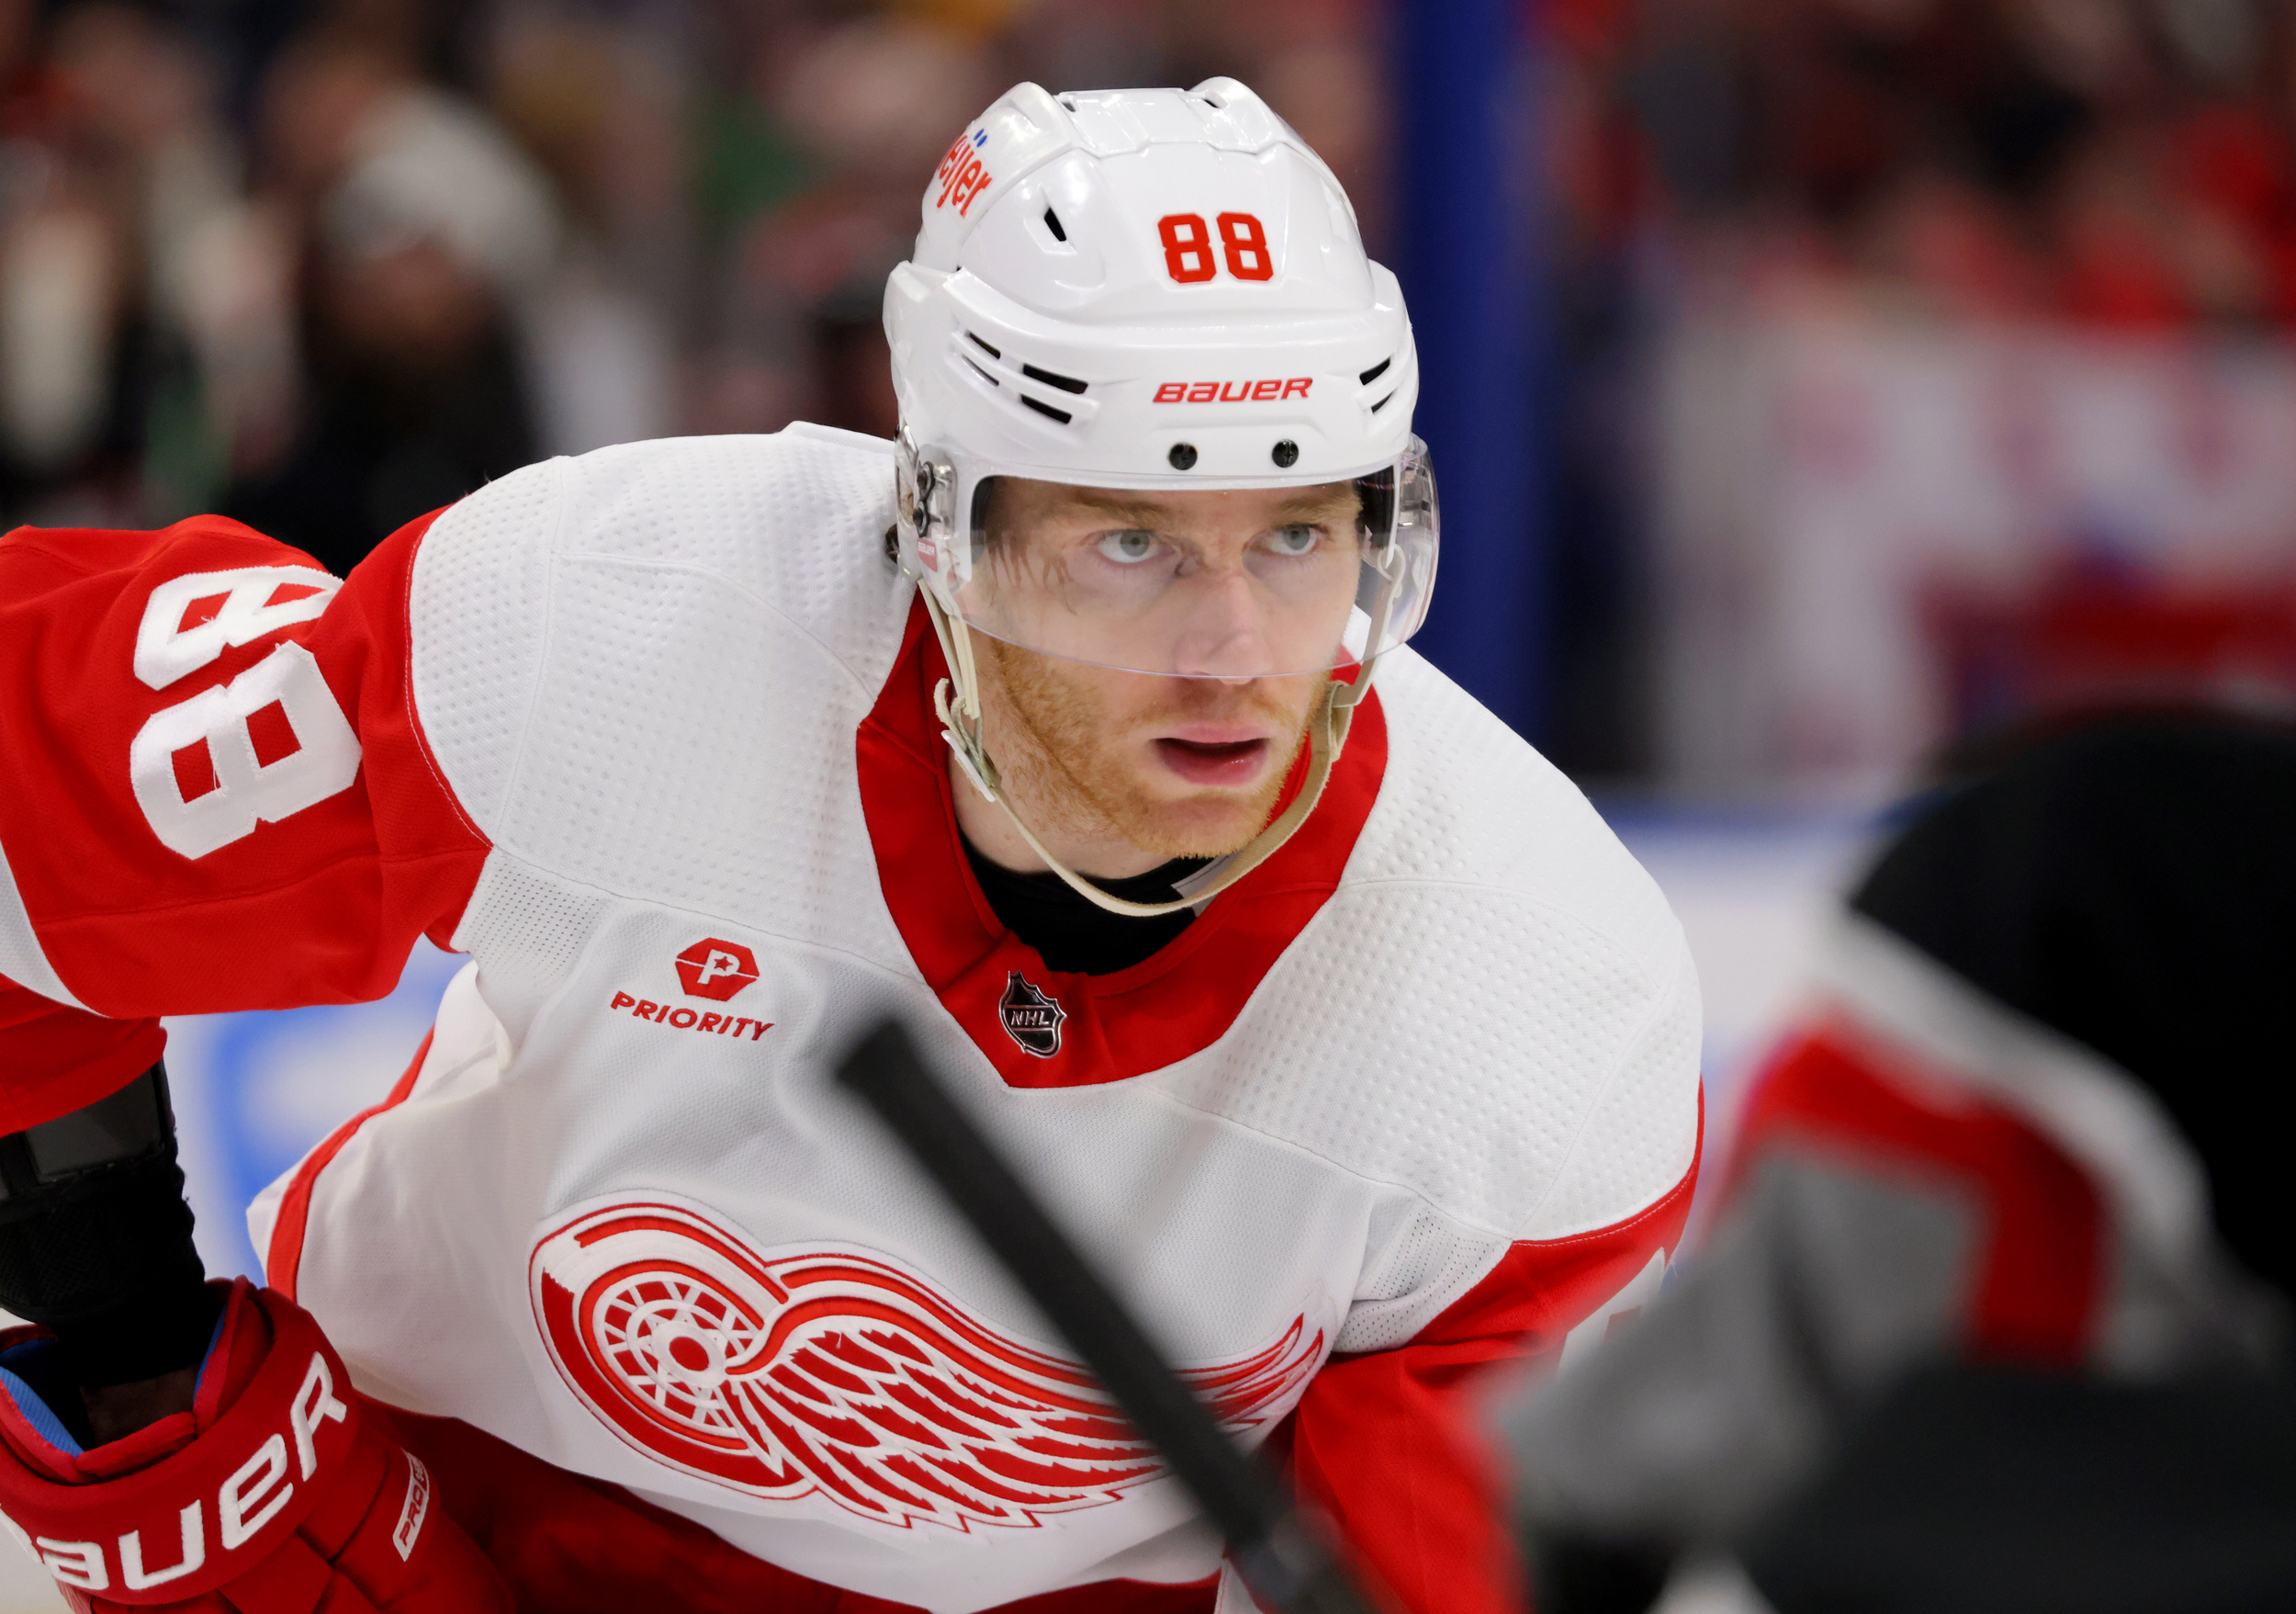 will patrick kane remain with the red wings or move on?